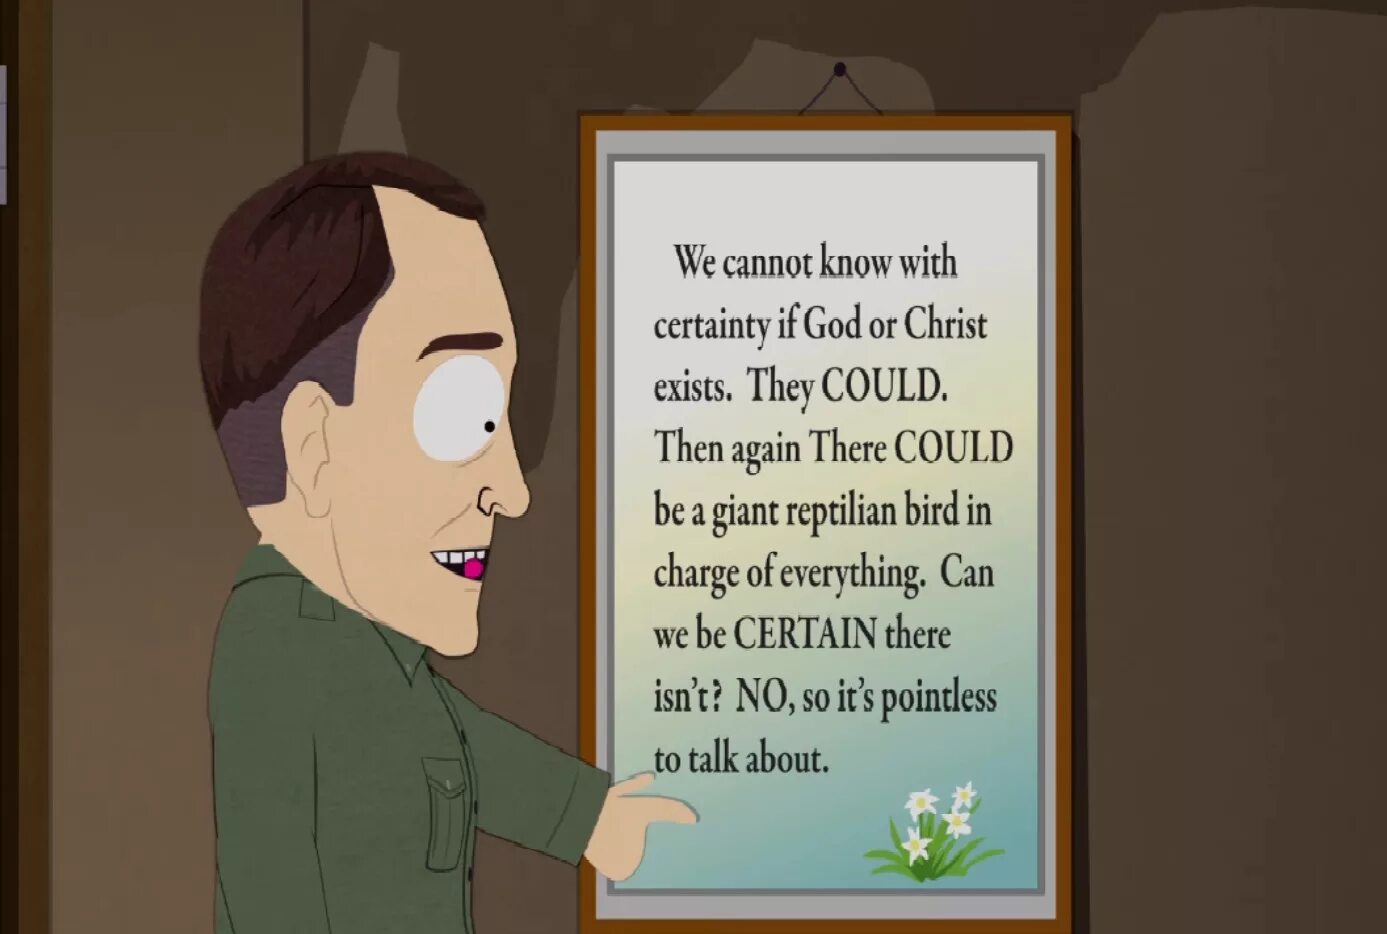 I can certainly. Южный парк агностики. If God exists Rick its. It's pointless to be.